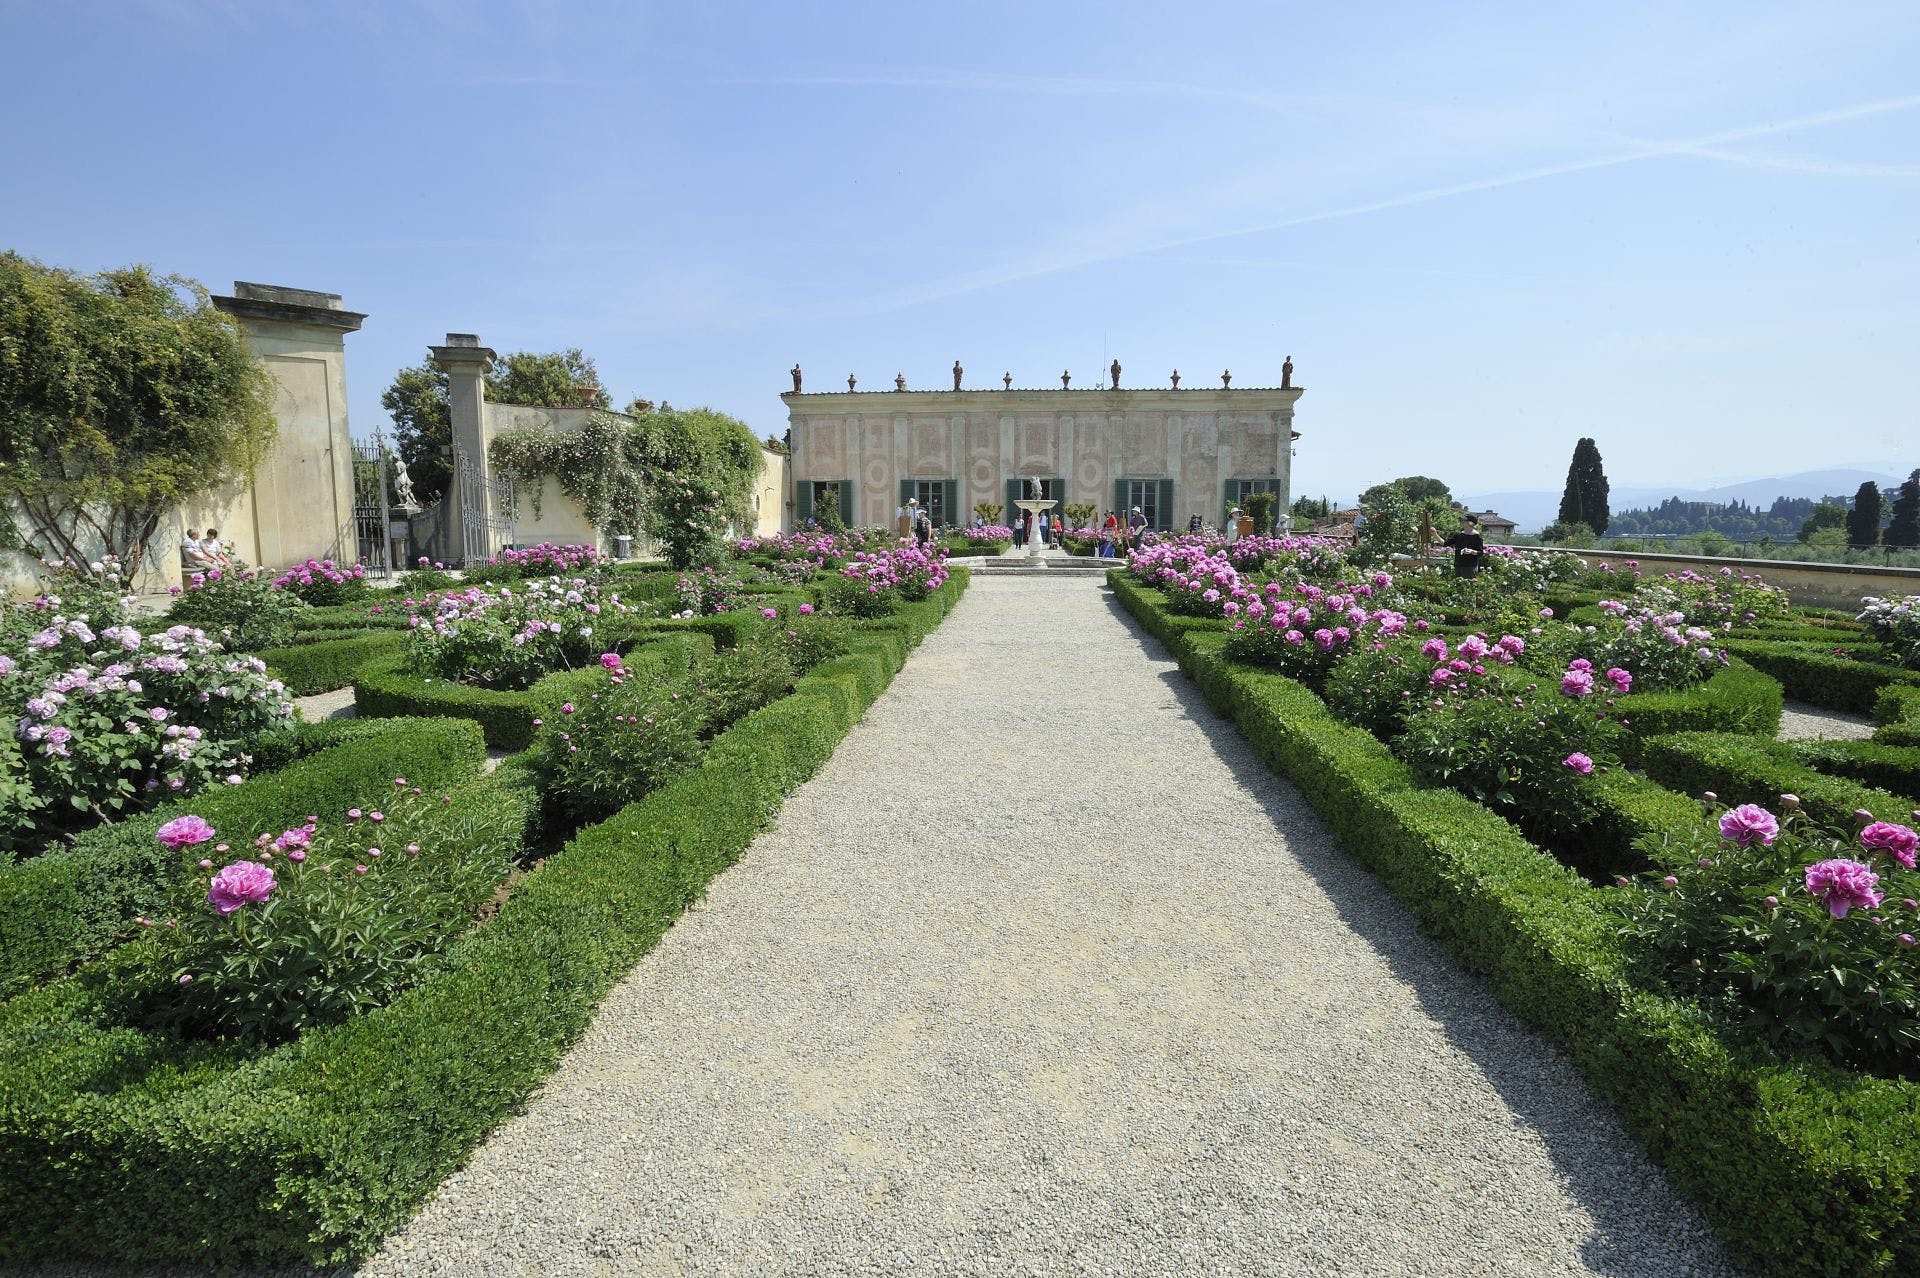 Save the Date: VI European Forum on Historic Gardens “A Europe of United Gardens”